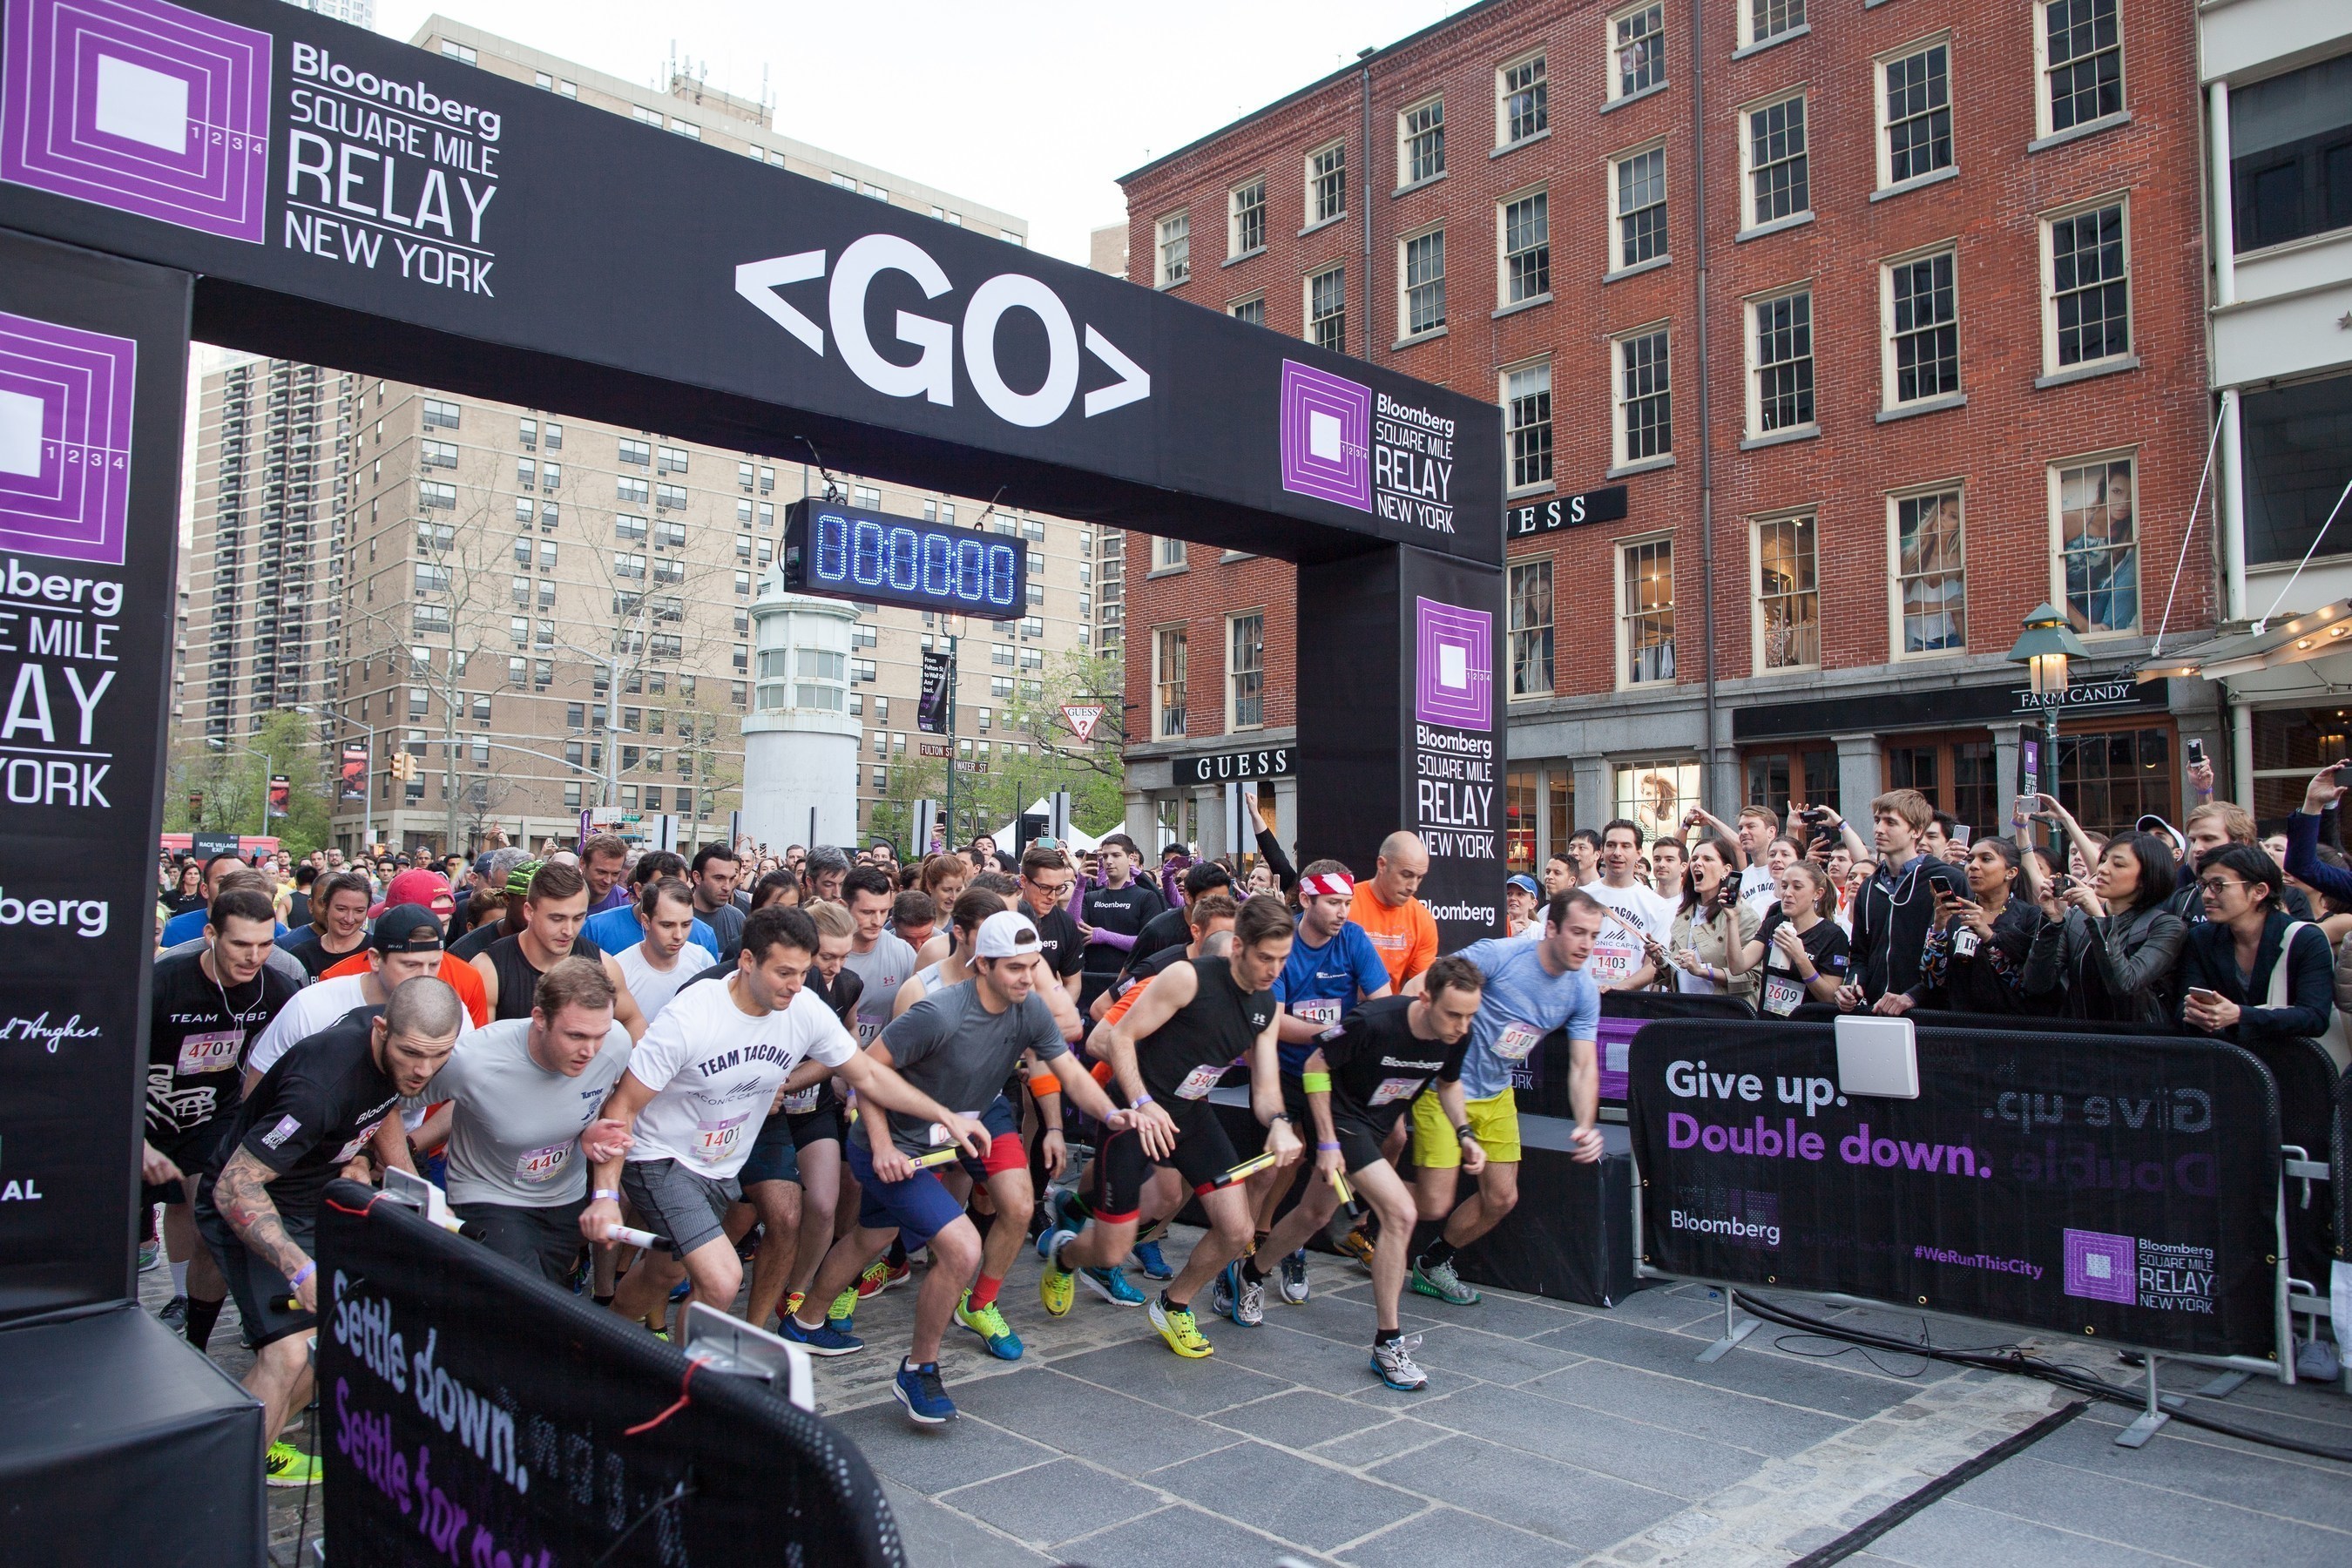 Team From Wells Fargo Wins New York's First Bloomberg Square Mile Relay (PRNewsFoto/Bloomberg)